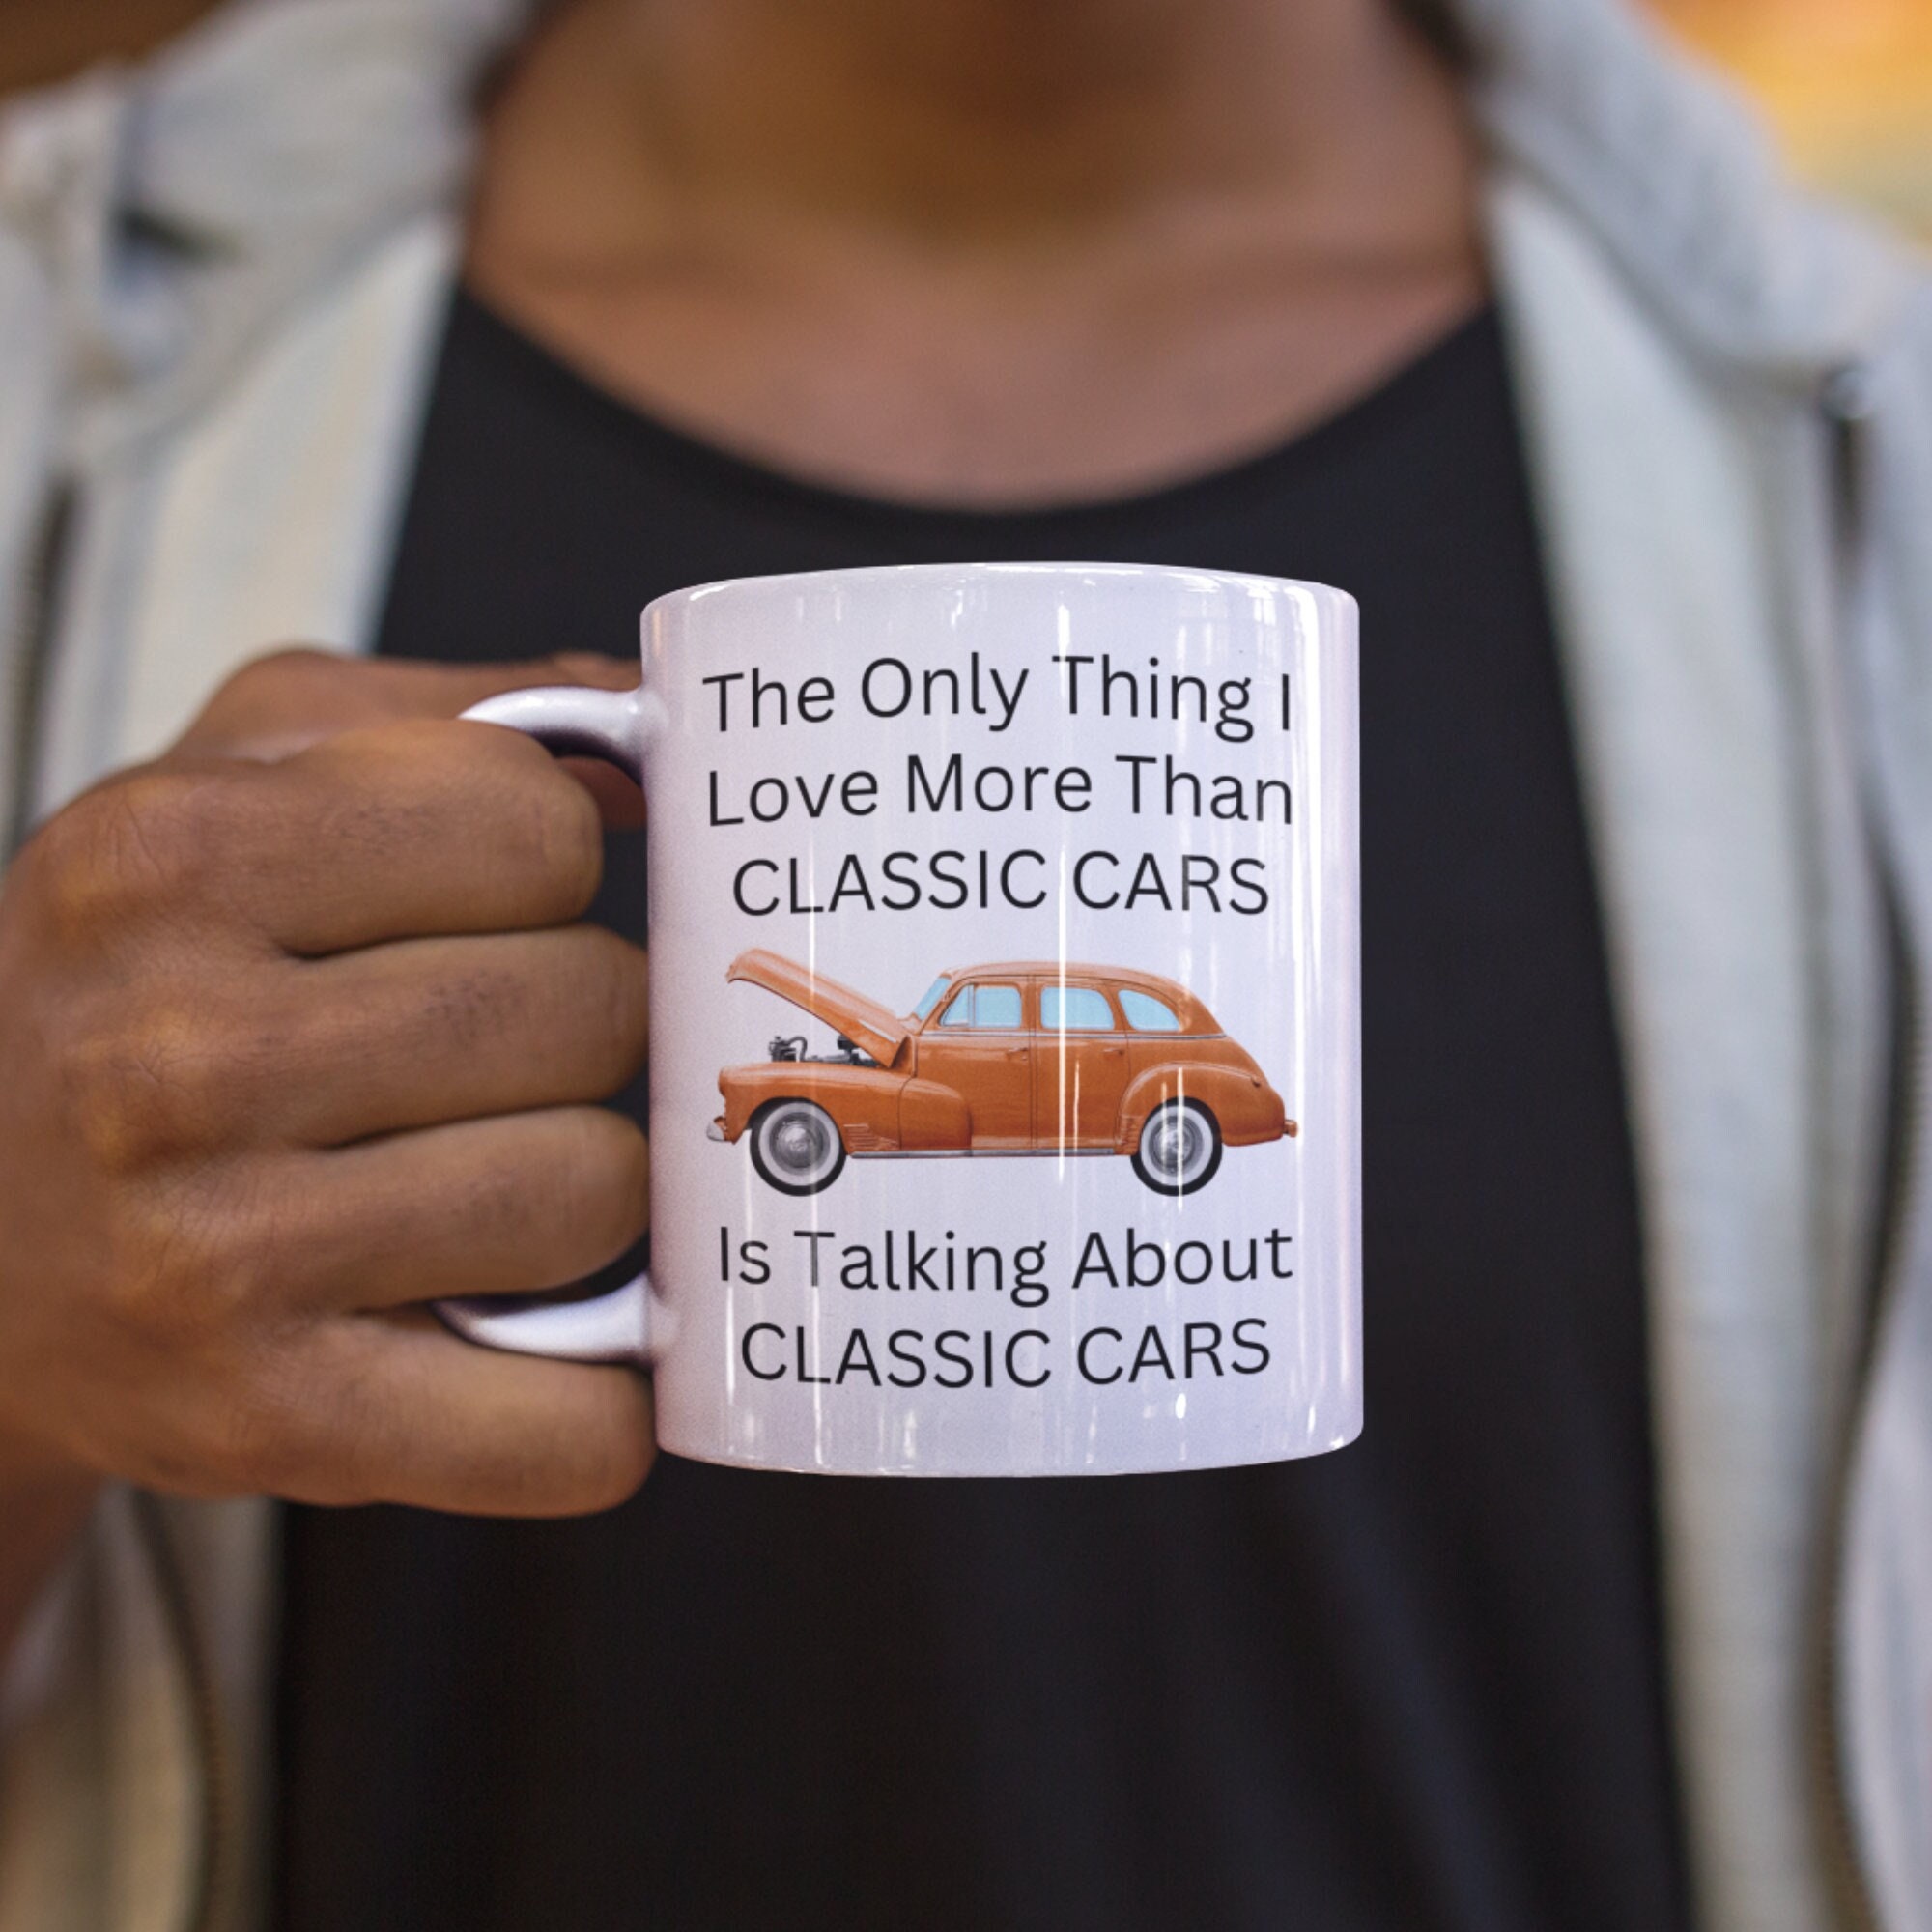  Stuff4 Gifts for Car Enthusiasts - in My Head I'm Thinking  About Cars - Funny Classic Car Mug, Gifts for Cars Lovers, Petrol Head  Gifts, 11oz Ceramic Dishwasher Safe Premium Navy